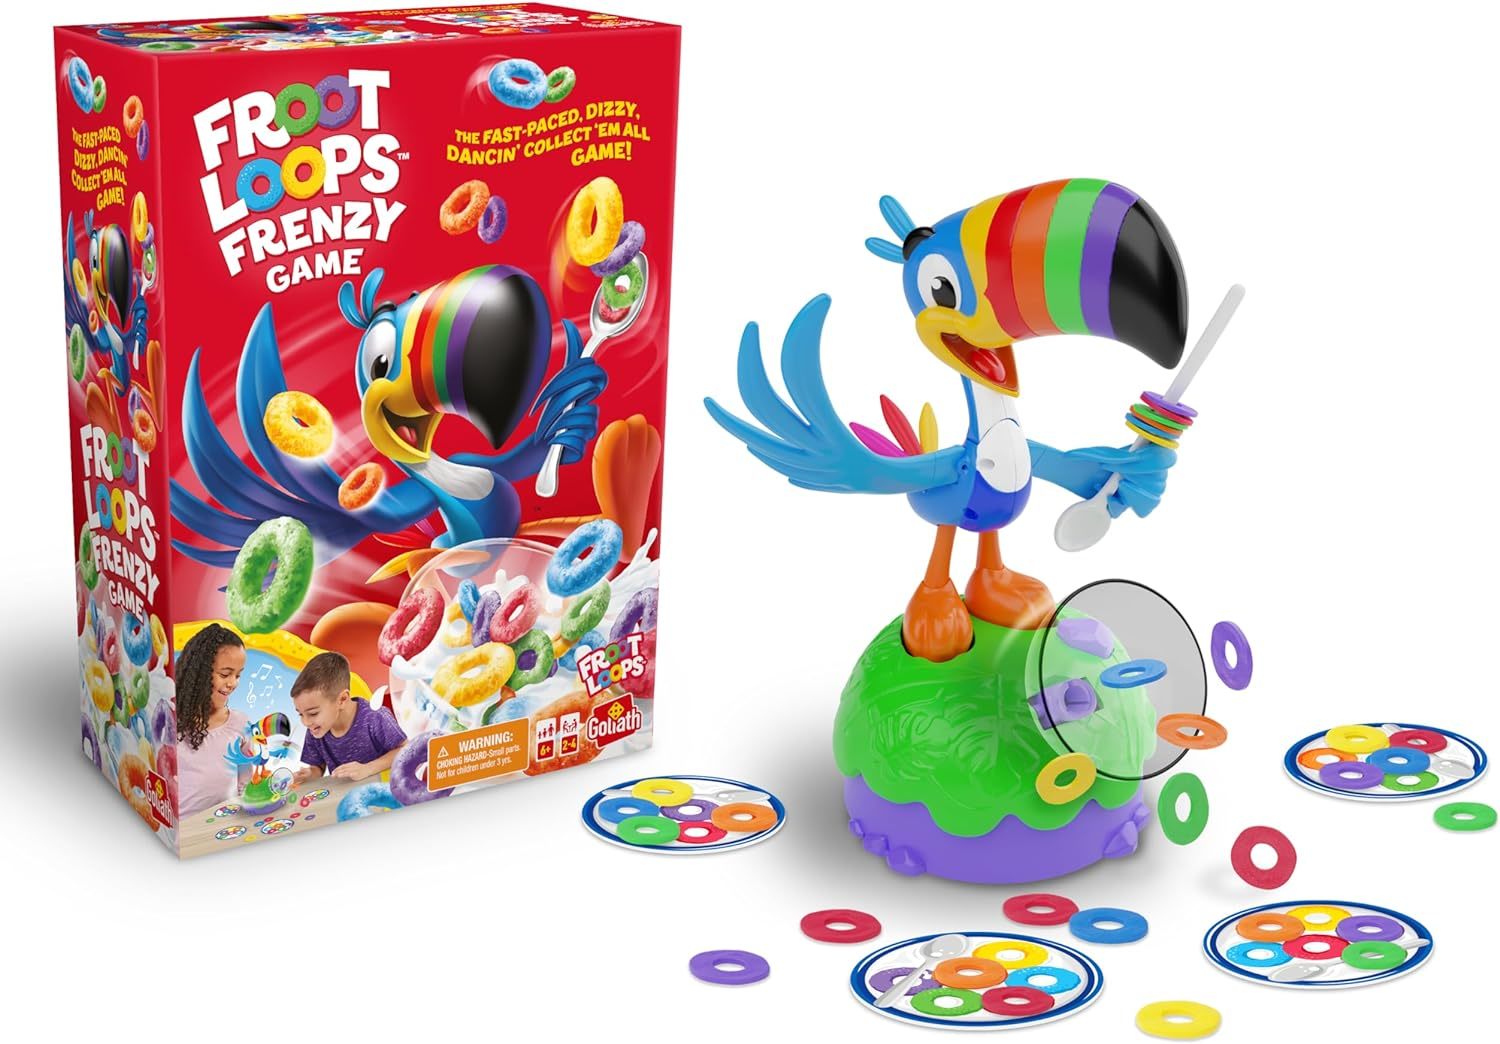 Primary image for Froot Loop Frenzy Skill Action Game The Fast Paced Dizzy Dancin' Collect 'Em All